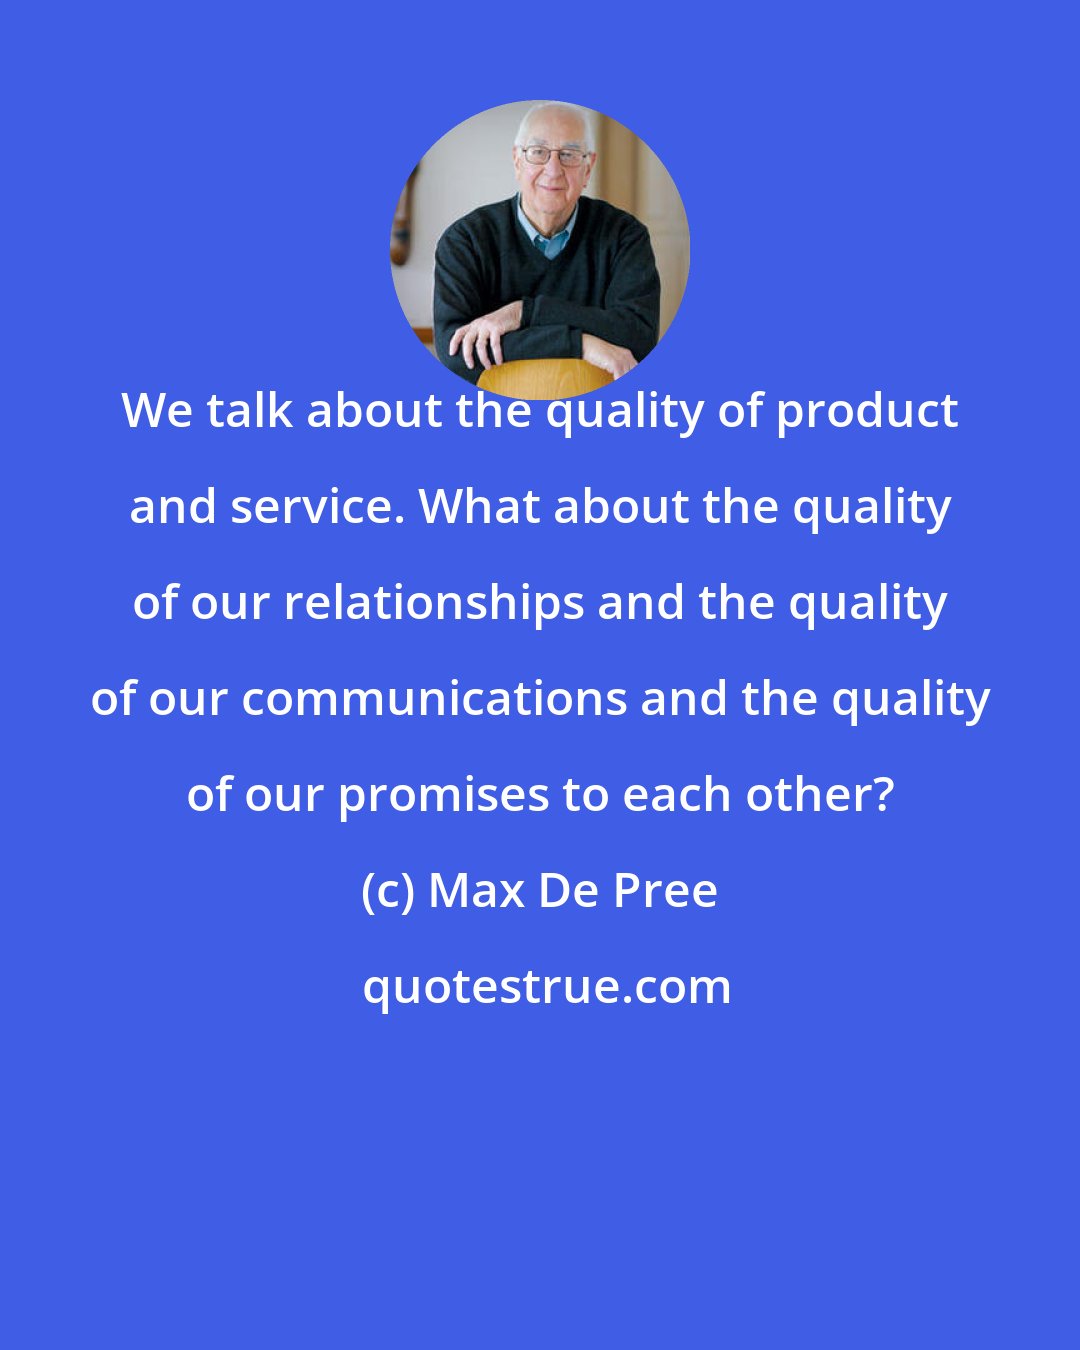 Max De Pree: We talk about the quality of product and service. What about the quality of our relationships and the quality of our communications and the quality of our promises to each other?